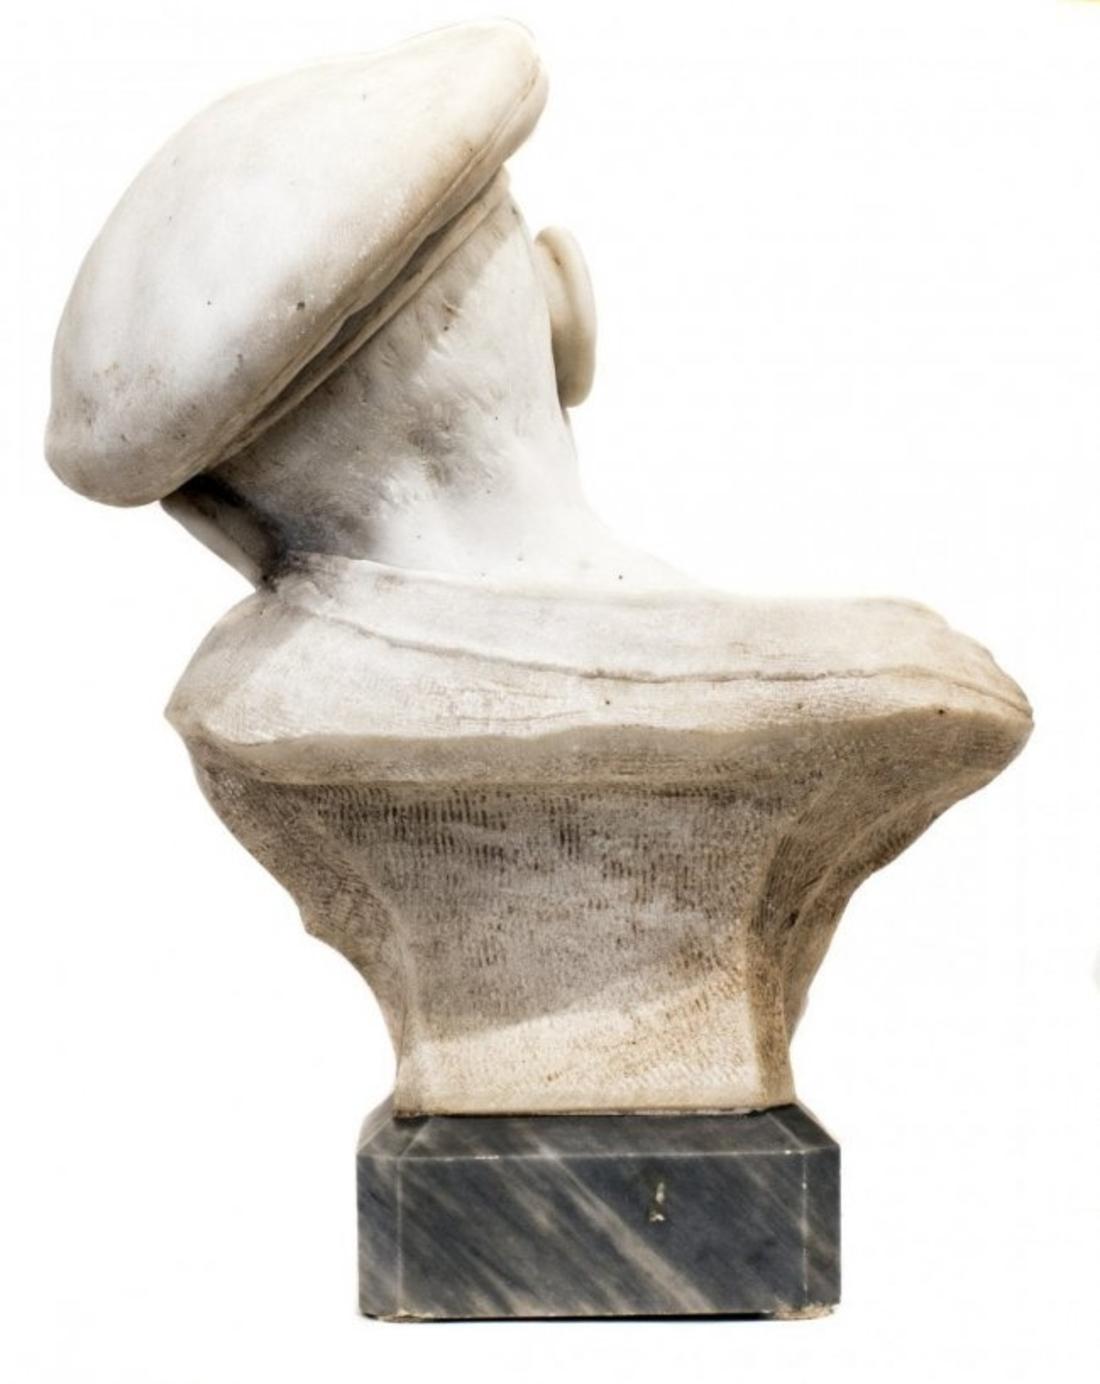 Maltoni, (Late 19th-early 20th century)
'Il Solletico' (the tickle).
Carved Carrara marble, set on a marble base
with the title IL SOLLETICO and MADE IN ITALY to the underside of the base,
the bust signed Martoni.
Measures: 18.5